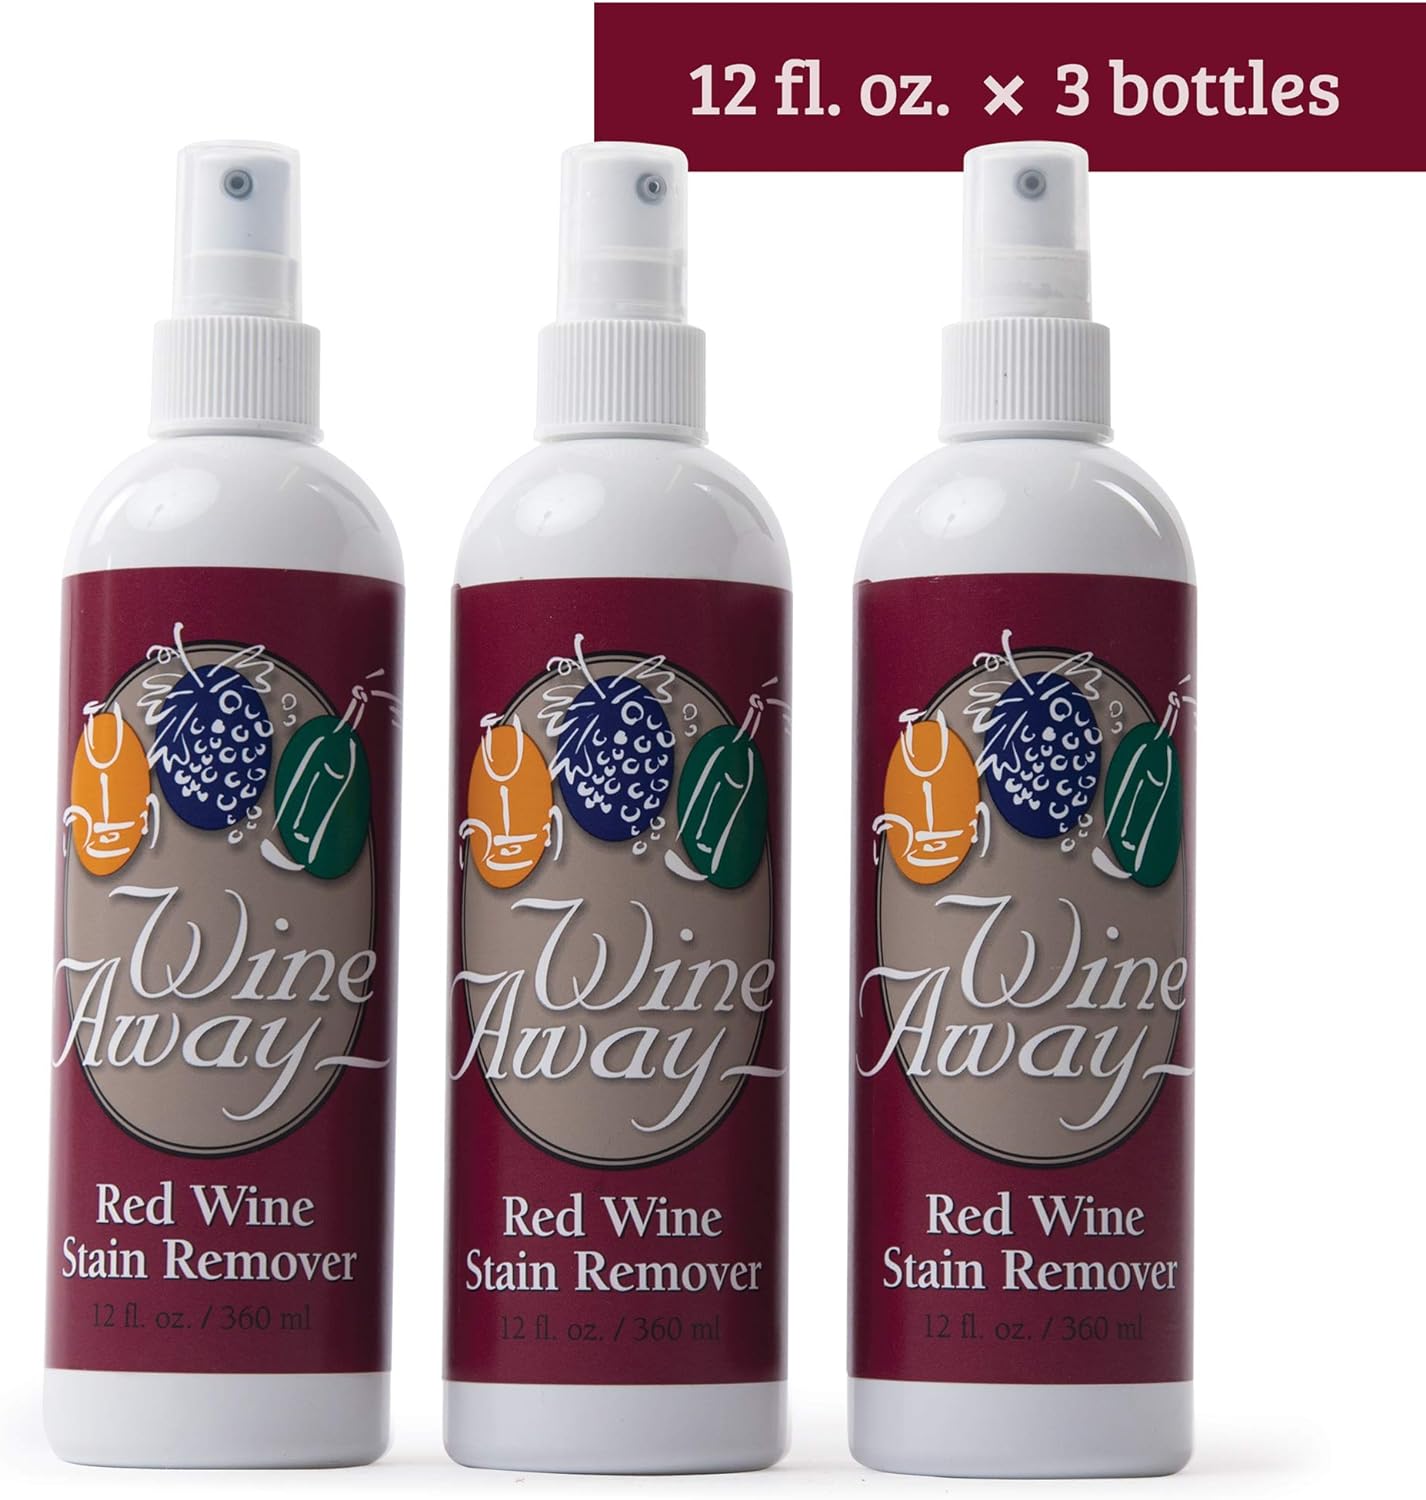 Wine Away Red Wine Stain Remover Spray - Natural Carpet and Upholstery Spot Cleaner - Effectively Removes Blood, Clothes, Coffee, & Pet Stains - Best on Both Fresh & Dried Stains - 12 Oz - Pack of 3 : Health & Household